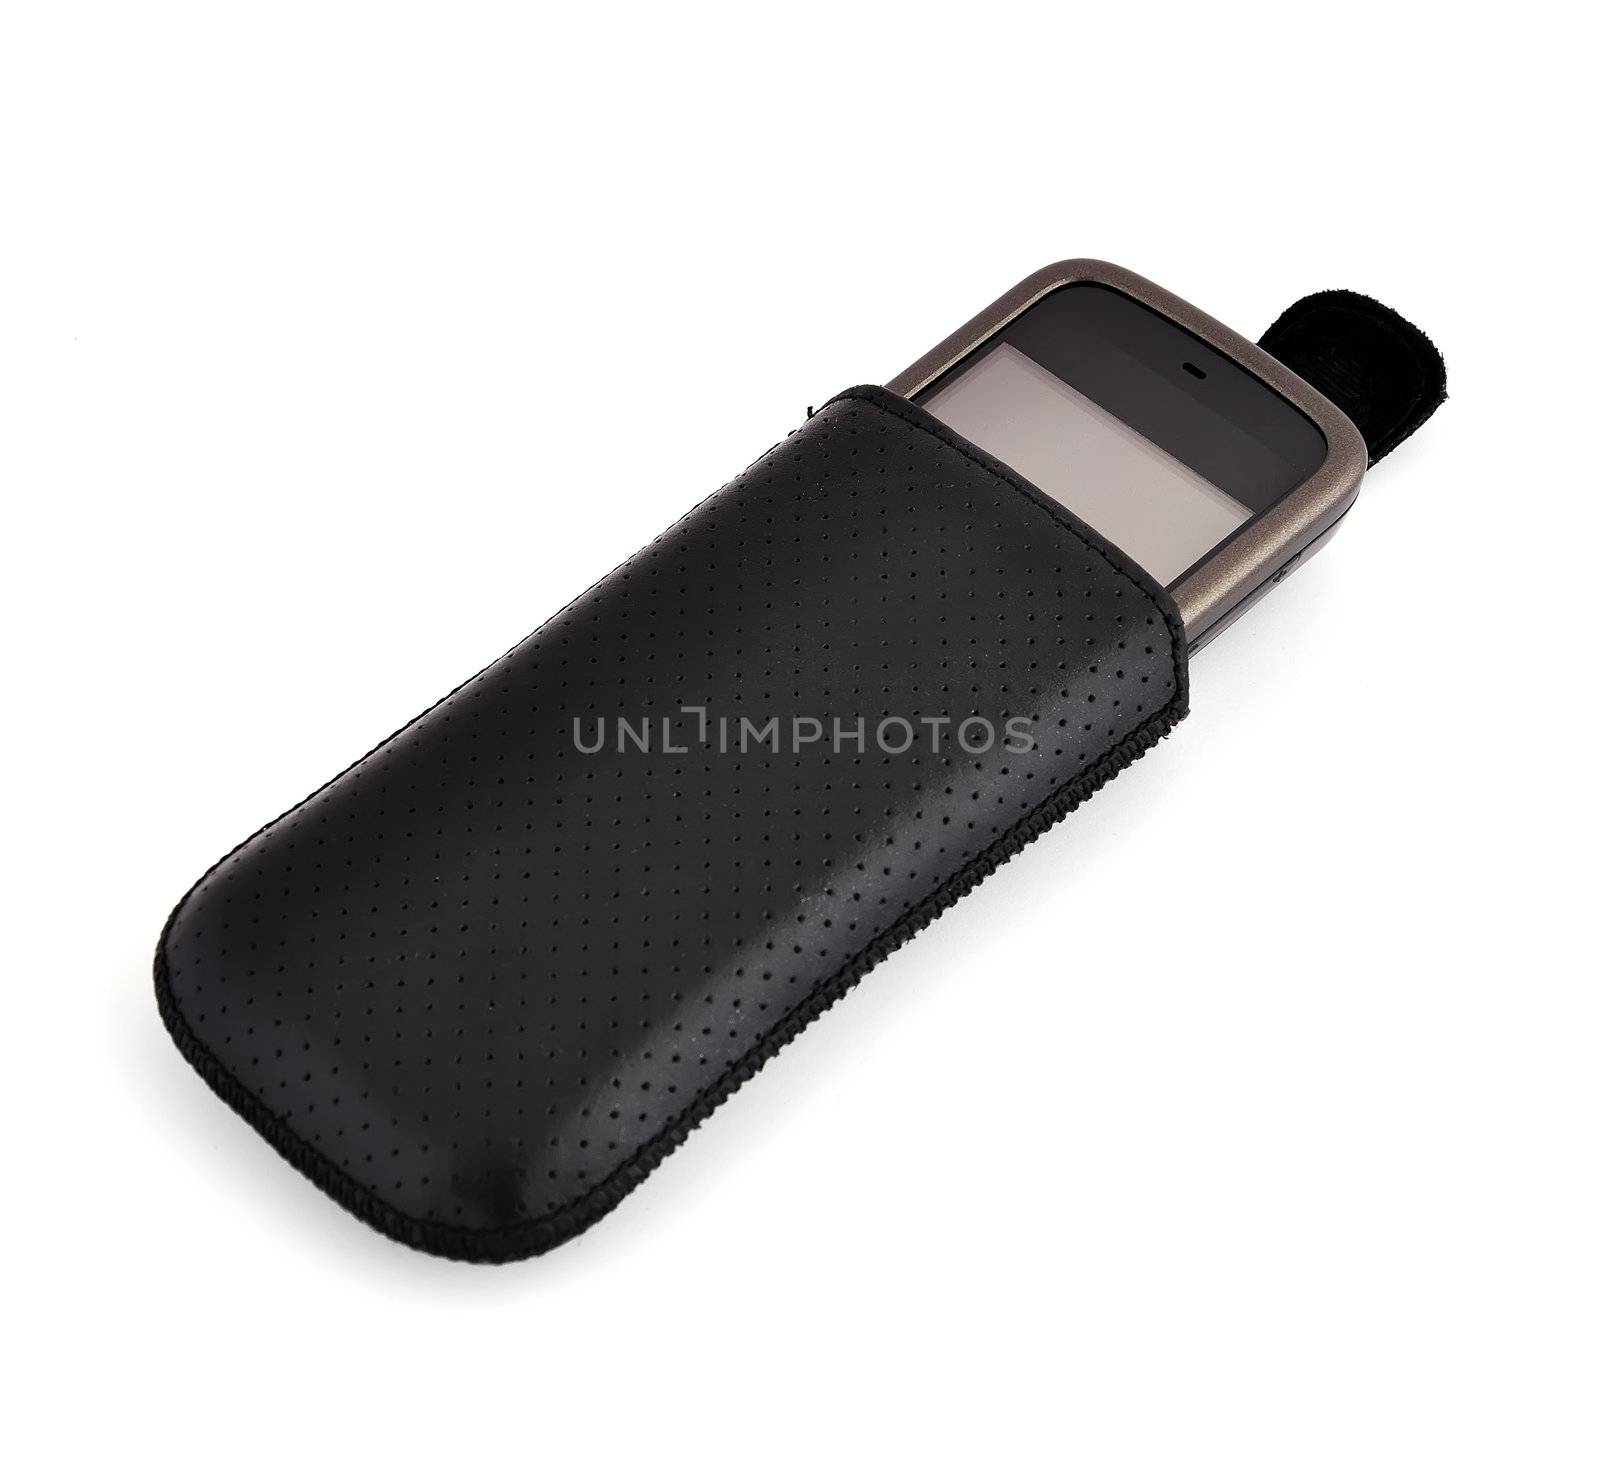 touchscreen mobile phone and cover on white background